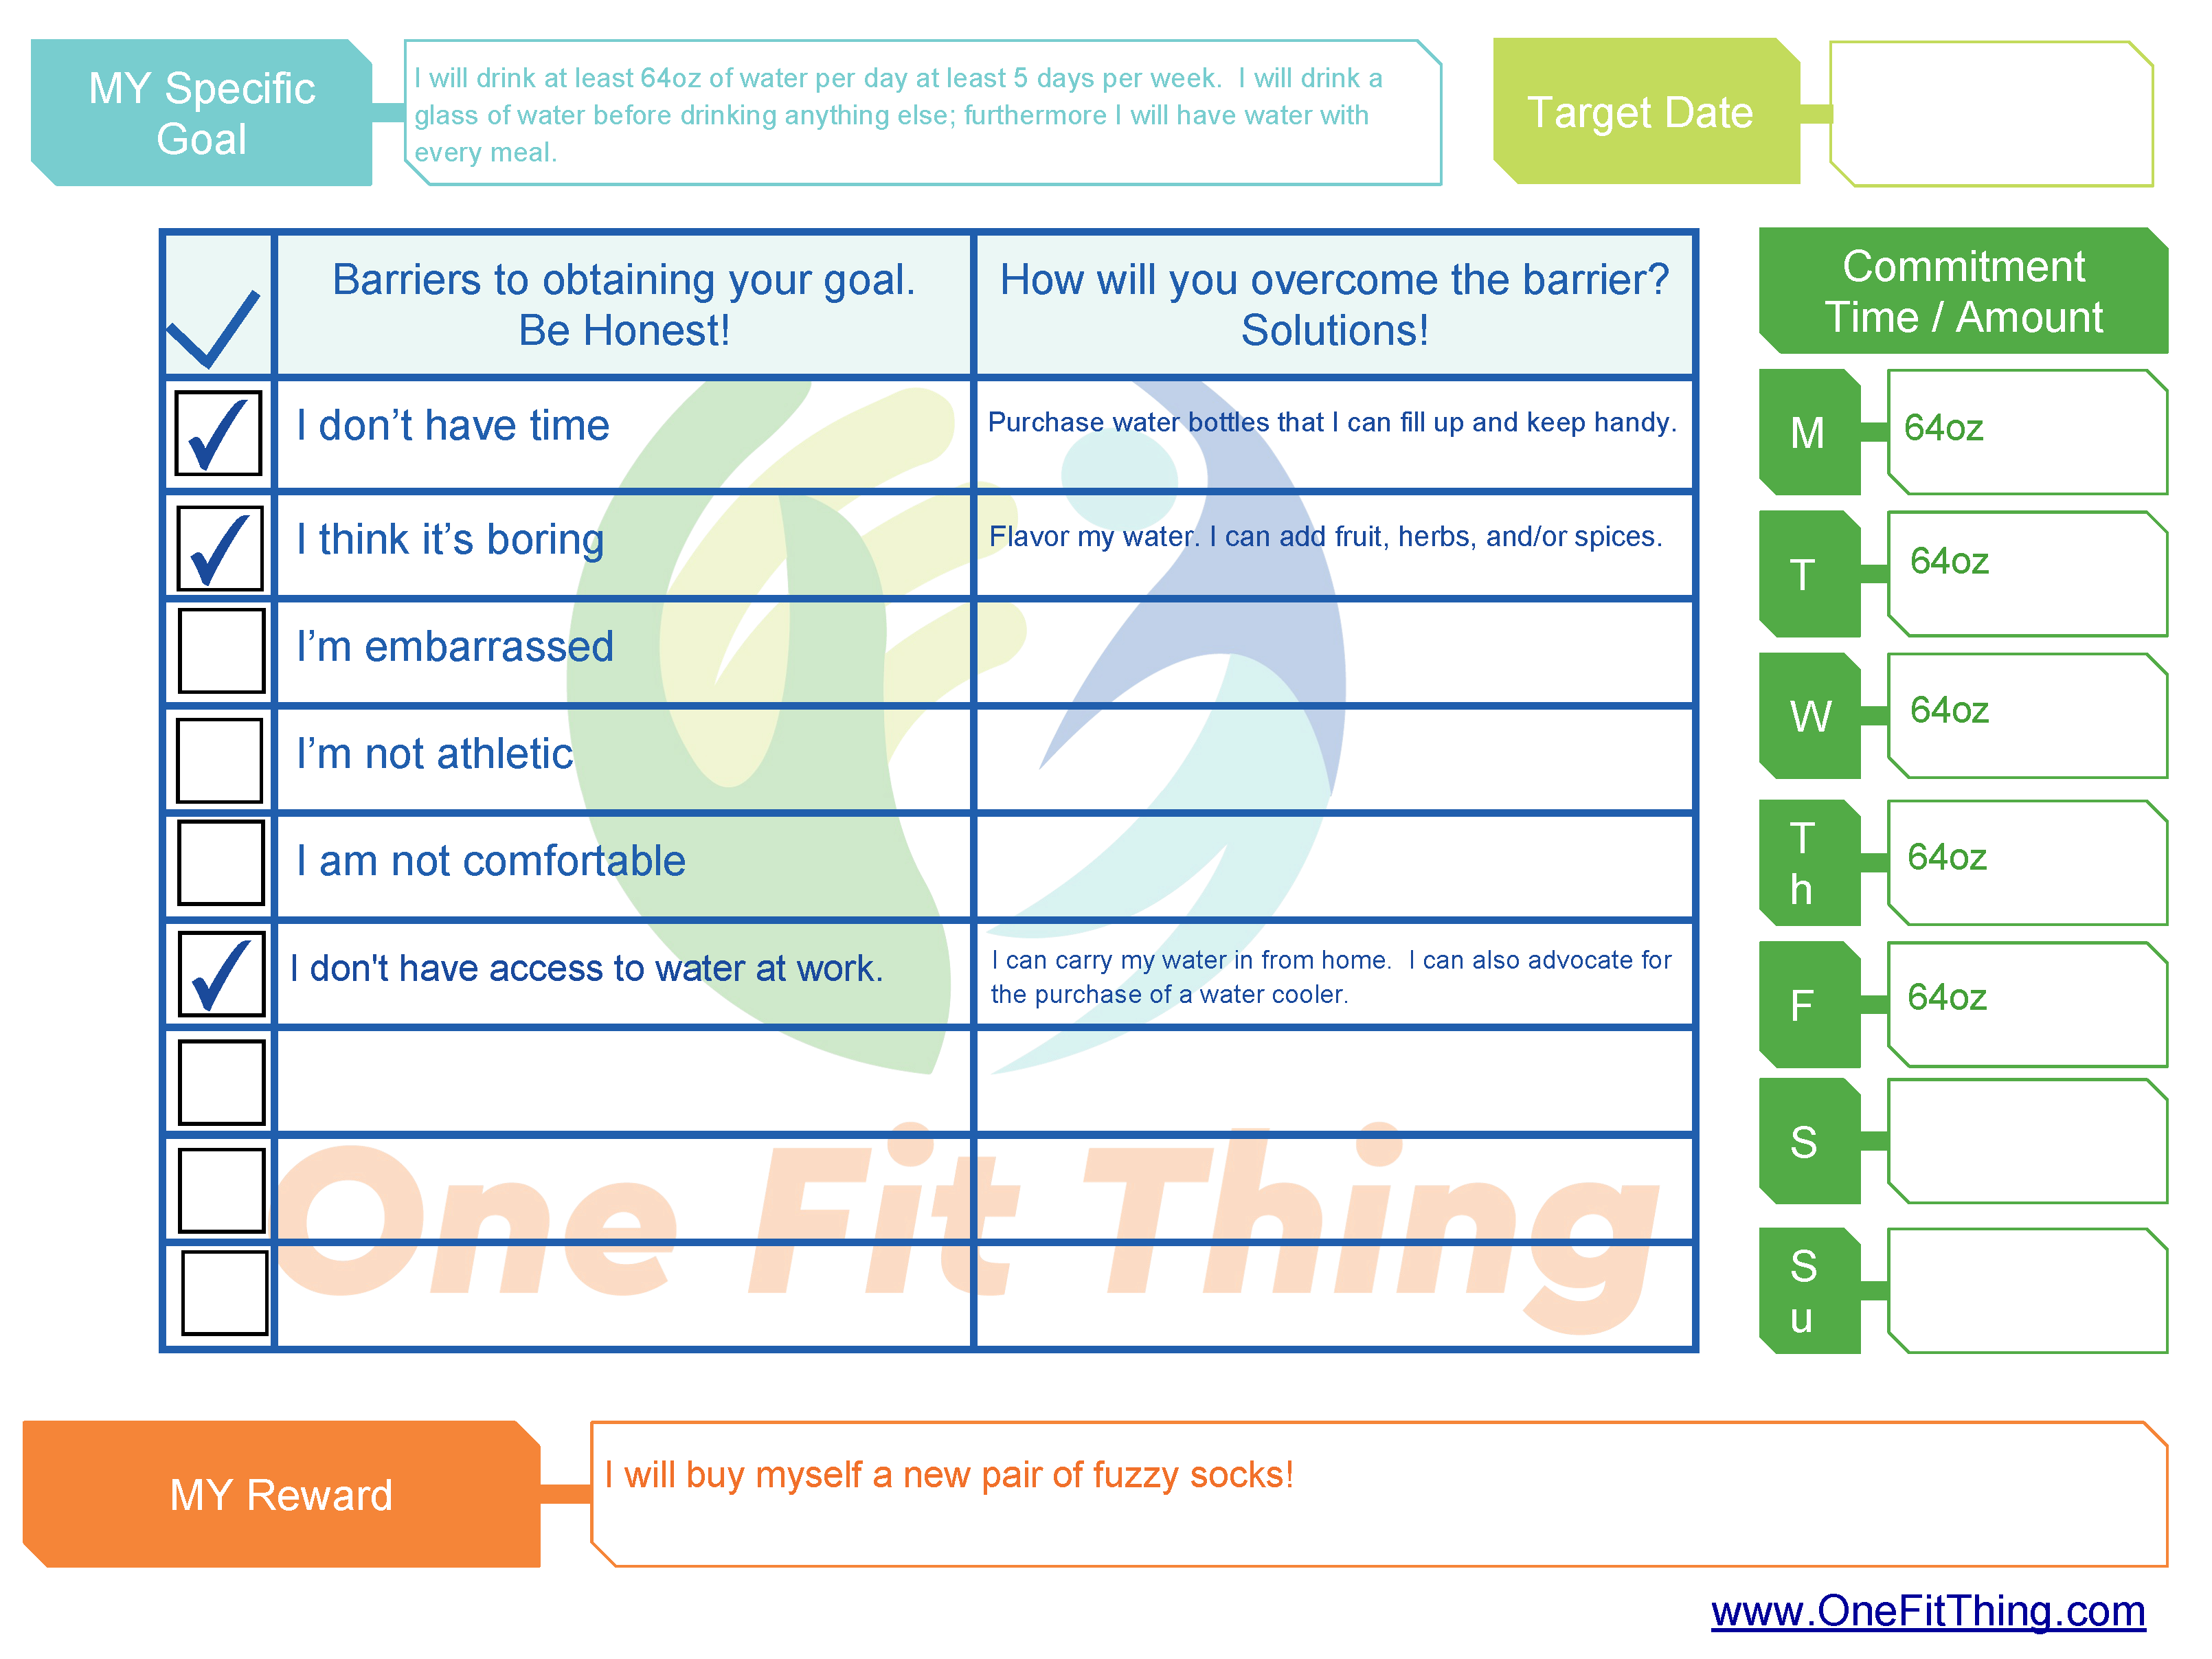 SMART Goal Tool - Removing and Overcoming Barriers Form Example